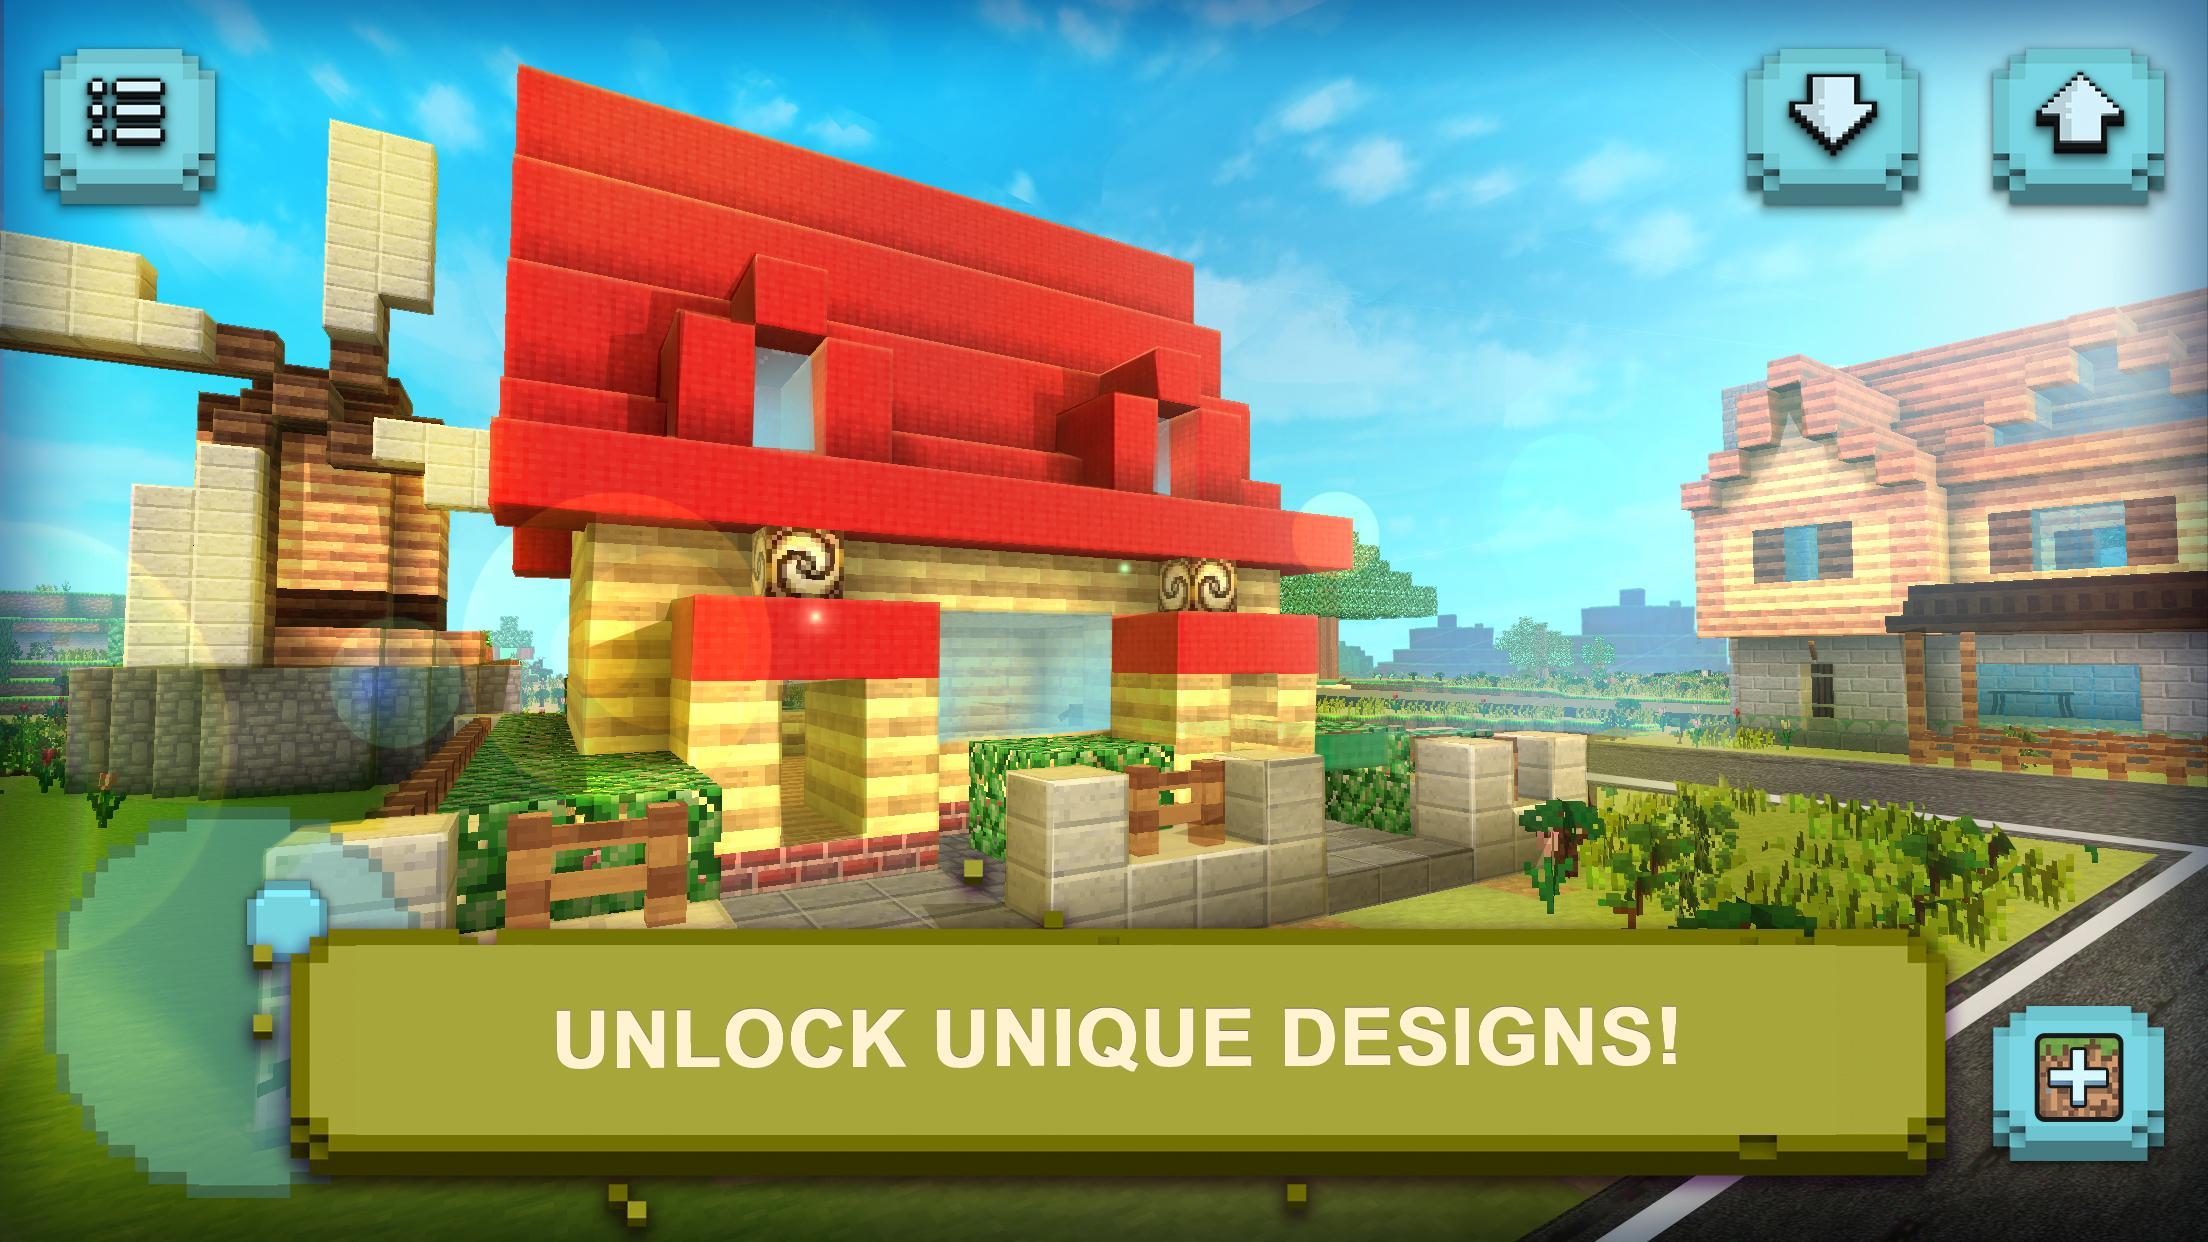 Builder Craft: House Building & Exploration for Android - APK Download